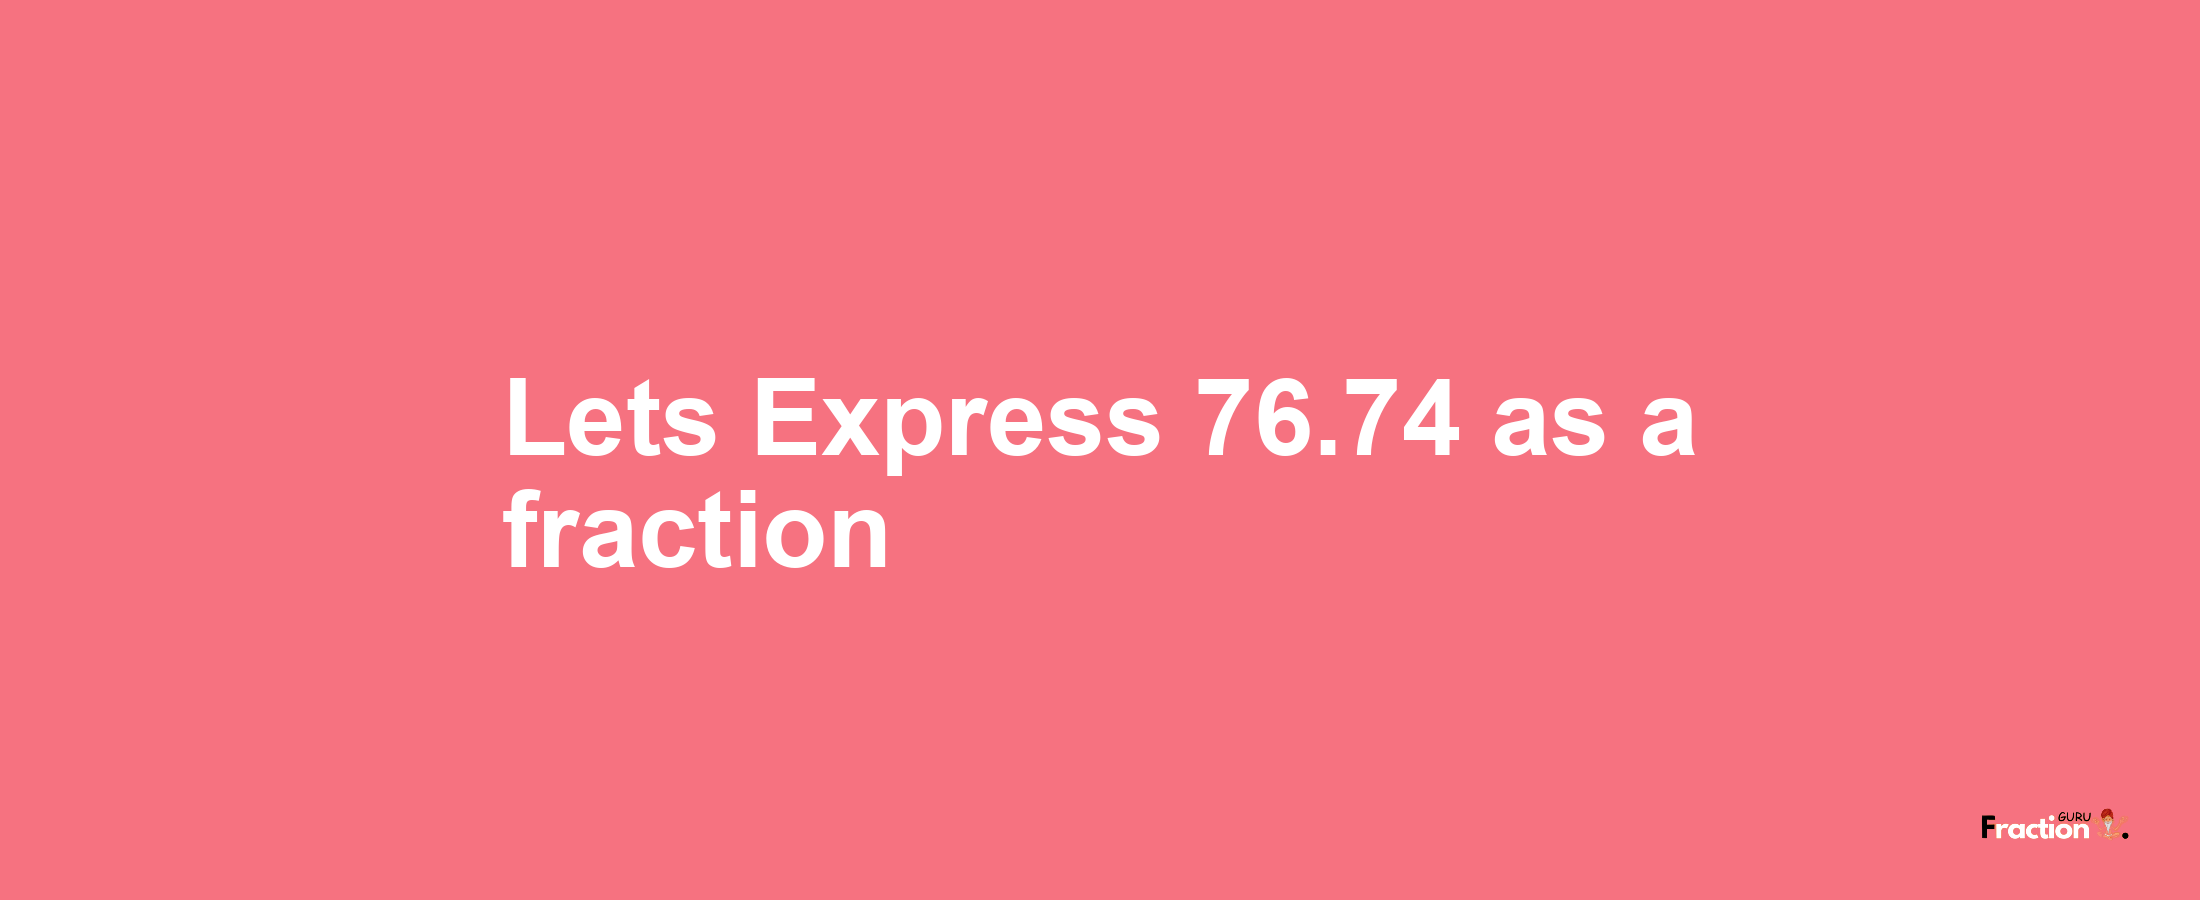 Lets Express 76.74 as afraction